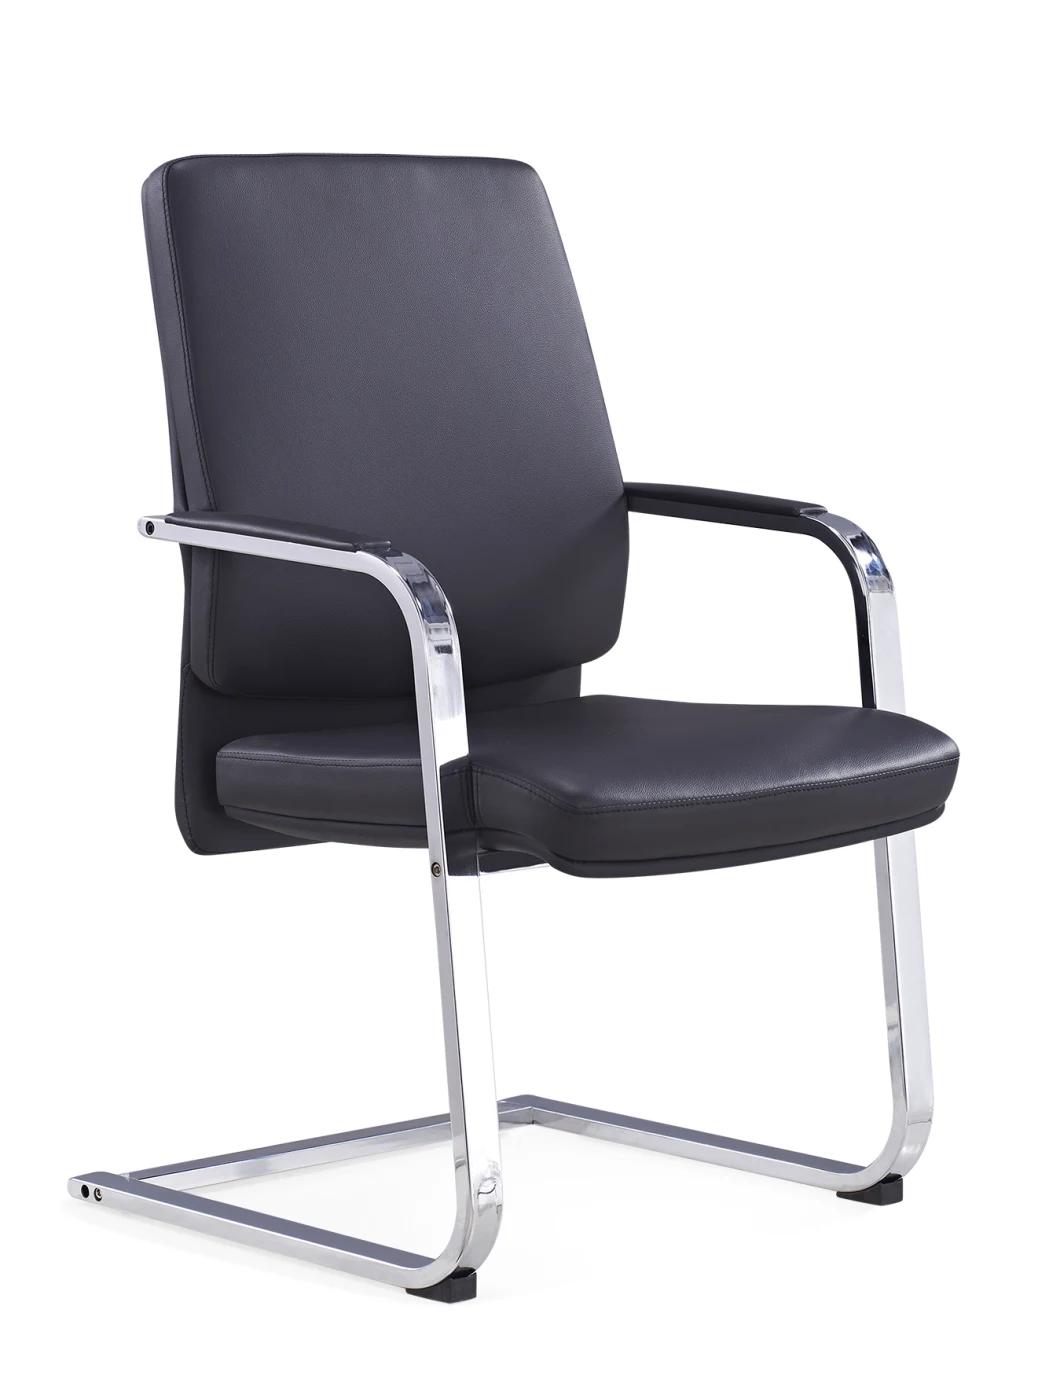 High Quality Wear-Resistance Genuine Leather Office Chairs Armrest Chairs